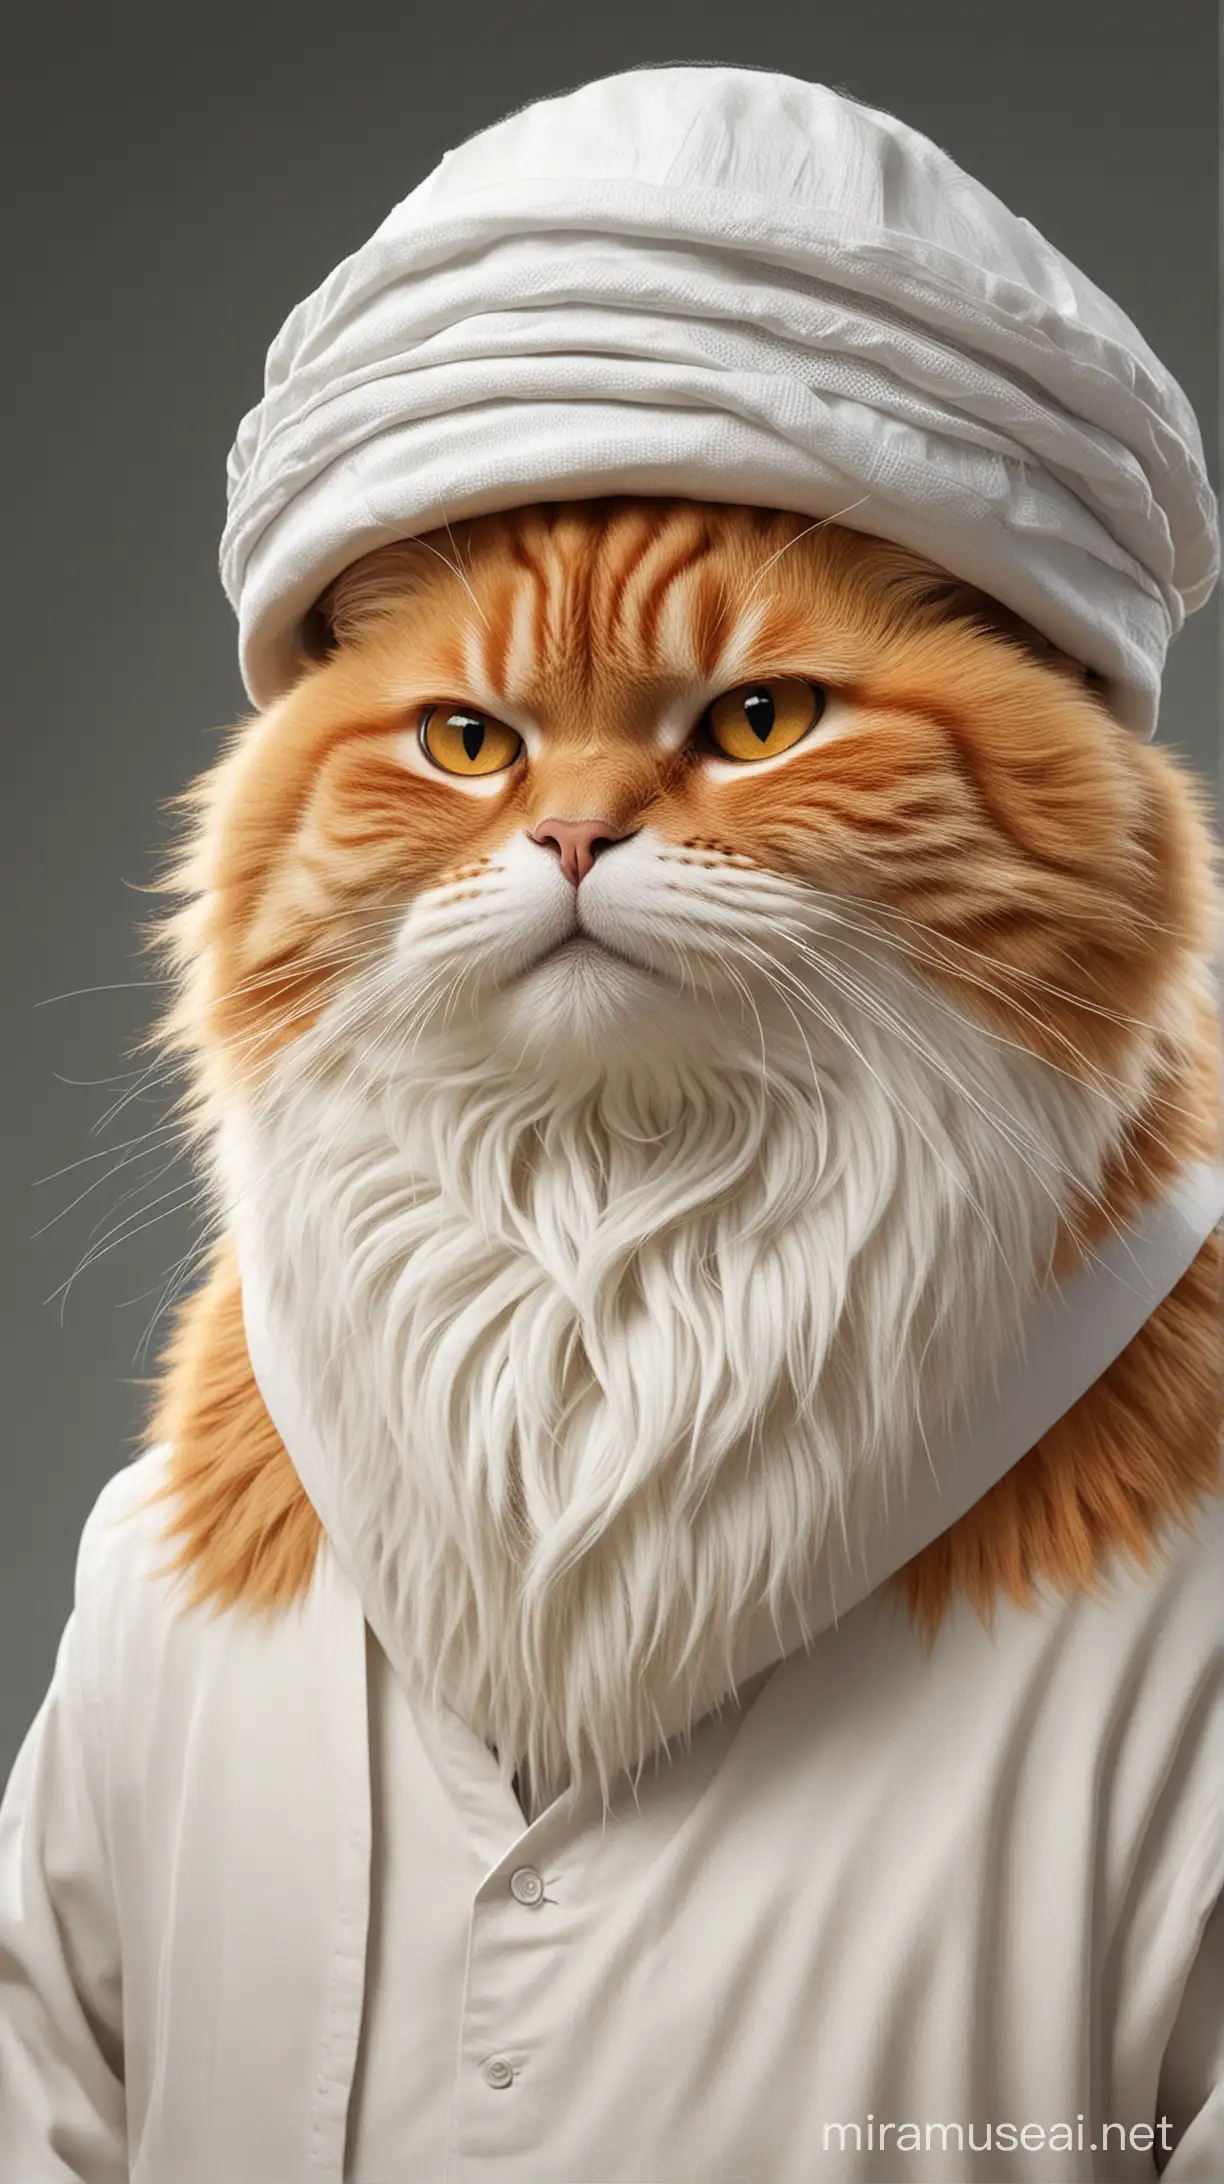 Illustration of a fat orange cat with thick hair wearing a Hajj cap and white vest but his arms are visible with orange fur, next to him is an Indonesian grandfather with olive skin, white hair, wrinkled face, wearing a white Hajj cap. Their faces visible from the side are clear, 3D images, high resolution.